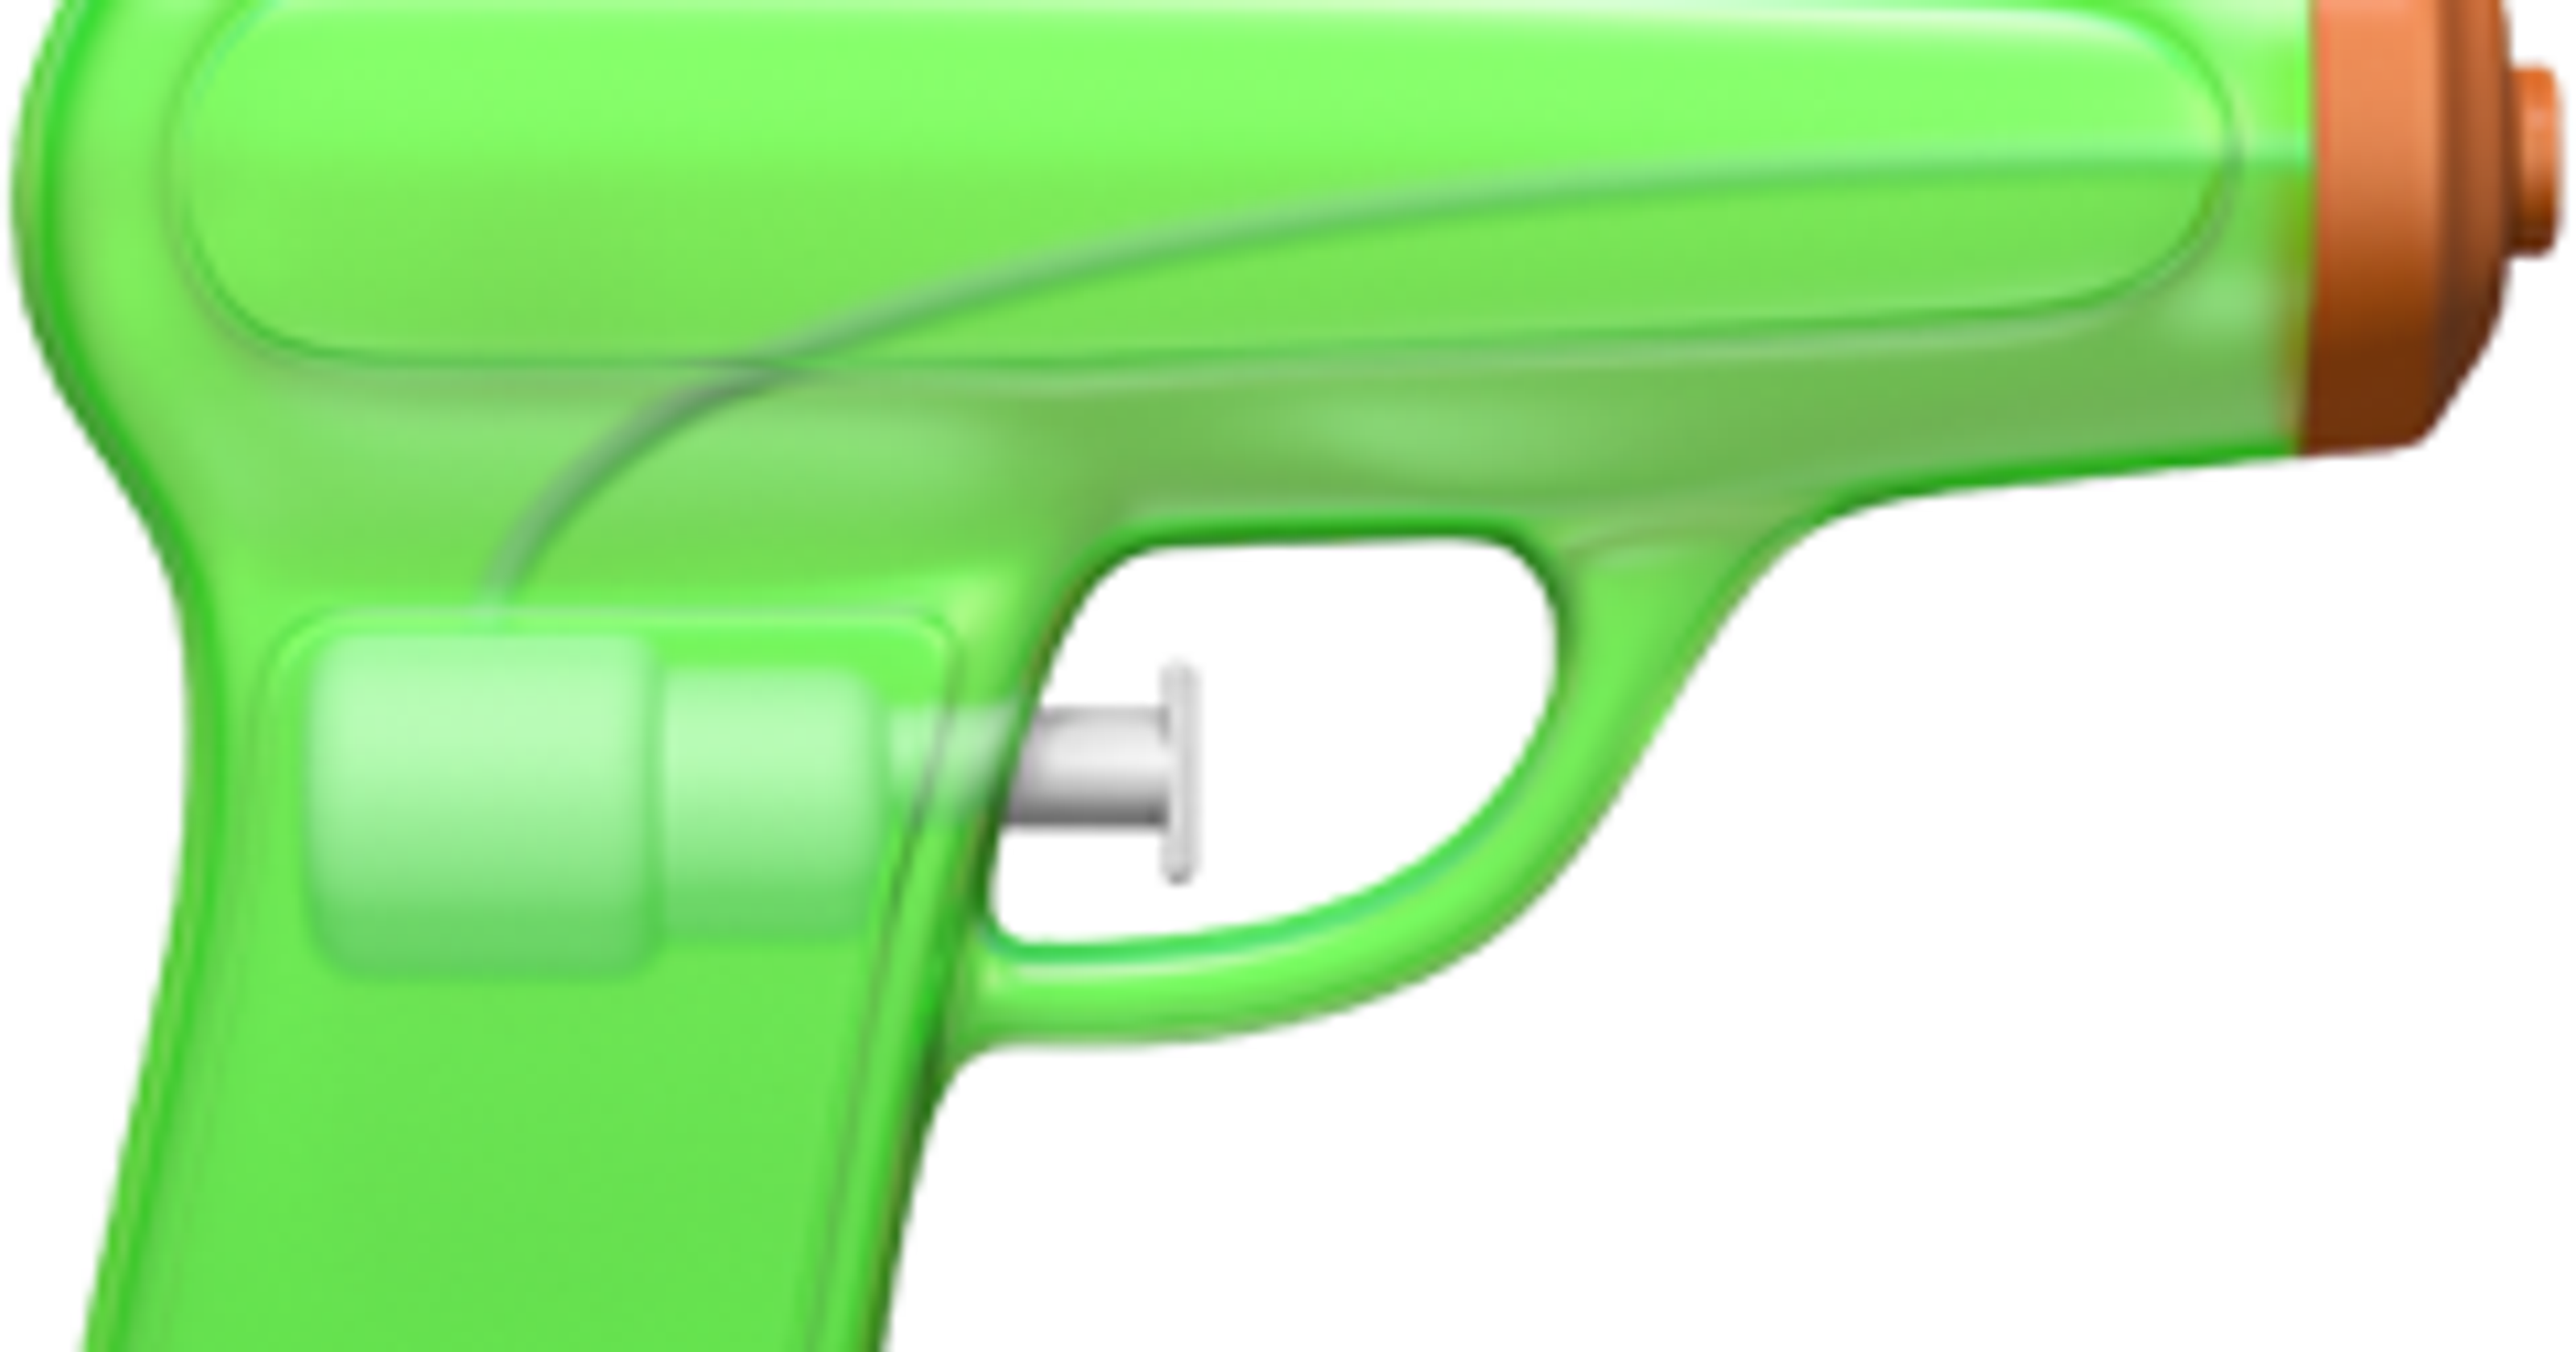 Apple Replaces Pistol Emoji With A Lime Green Squirt Gun